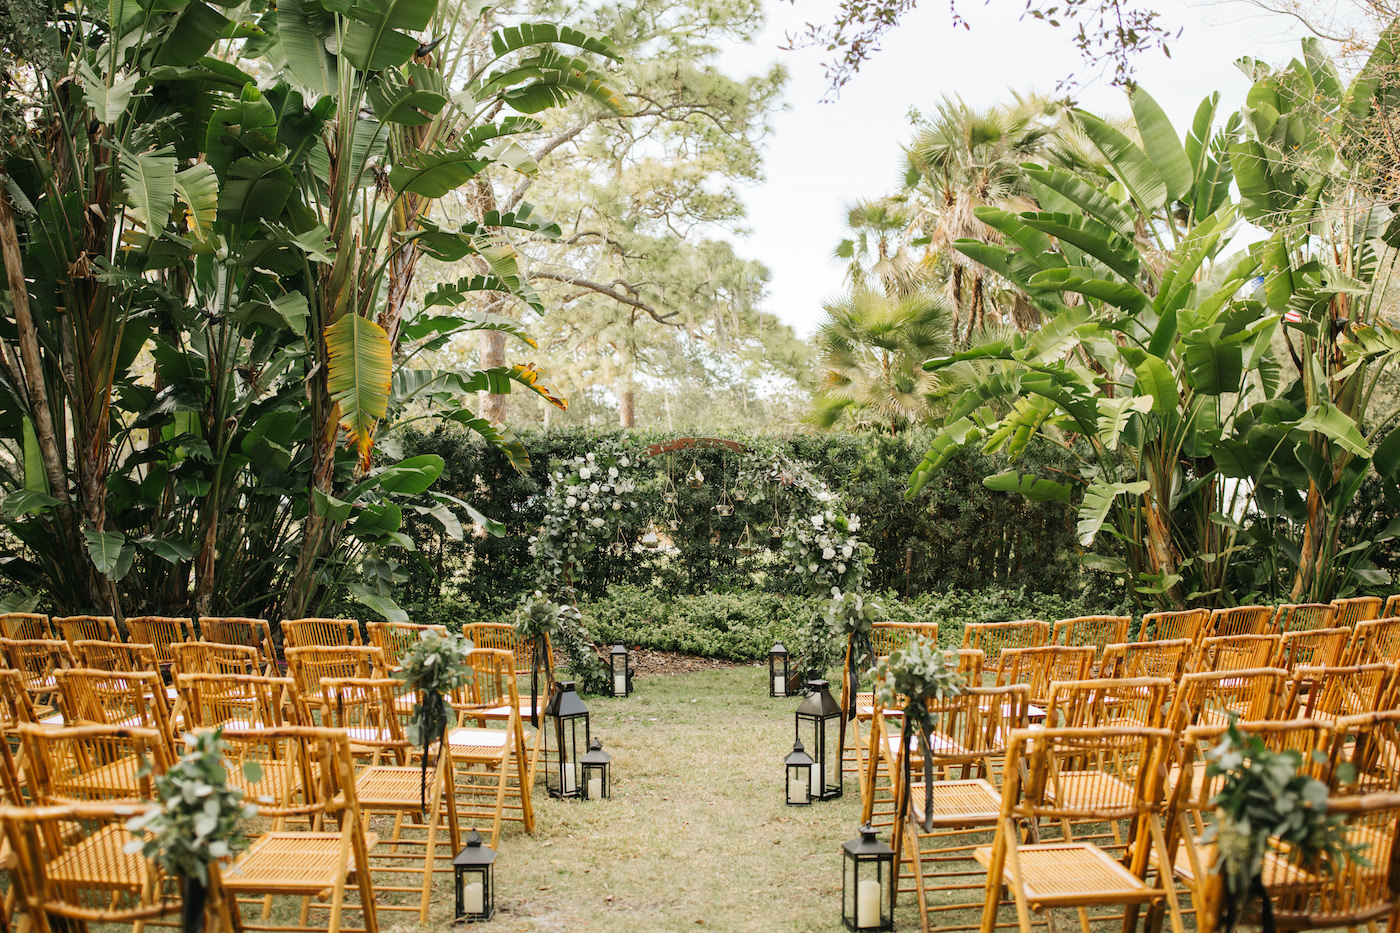 Boho Chic Outdoor Wedding Ceremony at Tampa Garden Club Venue | Natural Wood Bamboo Chairs with Black Lanterns and Eucalyptus Greenery Aisle Markers | Round Wood Moon Arch Ceremony Backdrop with Suspended Geometric Containers and Eucalyptus Greenery Garland Floral Arrangements | Winsor Event Studio